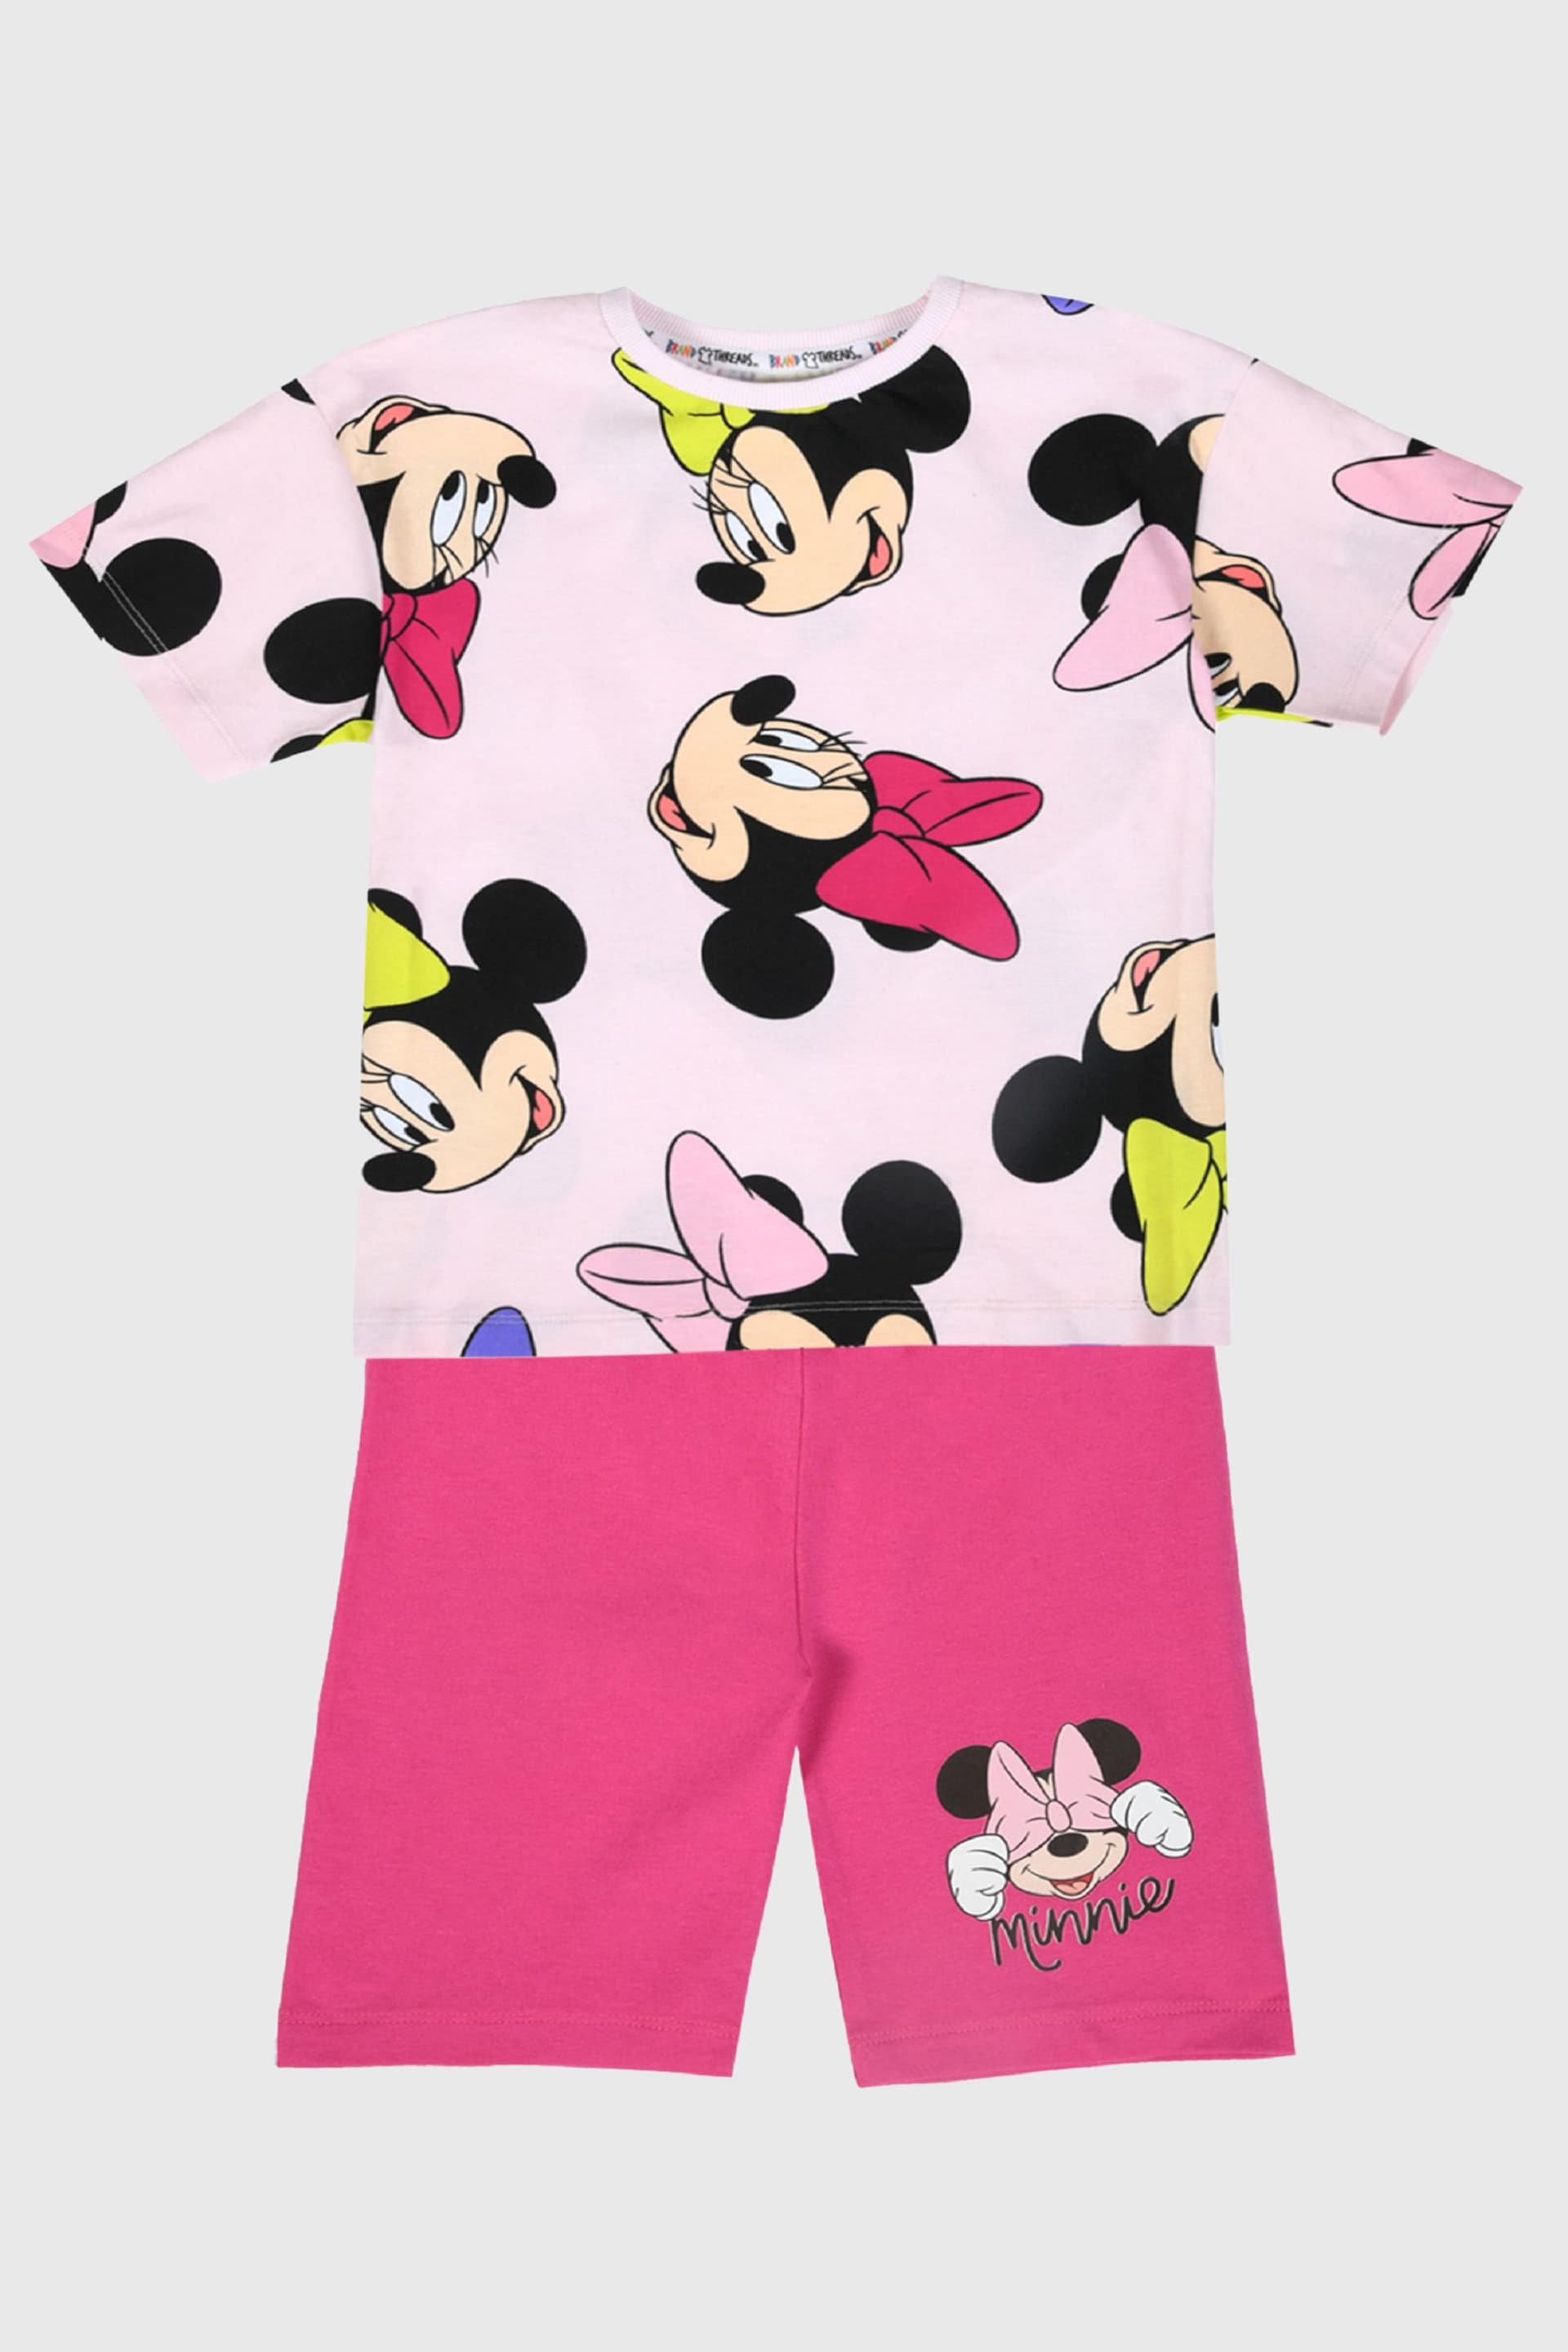 Brand Threads Pink Disney Minnie Mouse BoysT-Shirt and Shorts Set - Image 1 of 5